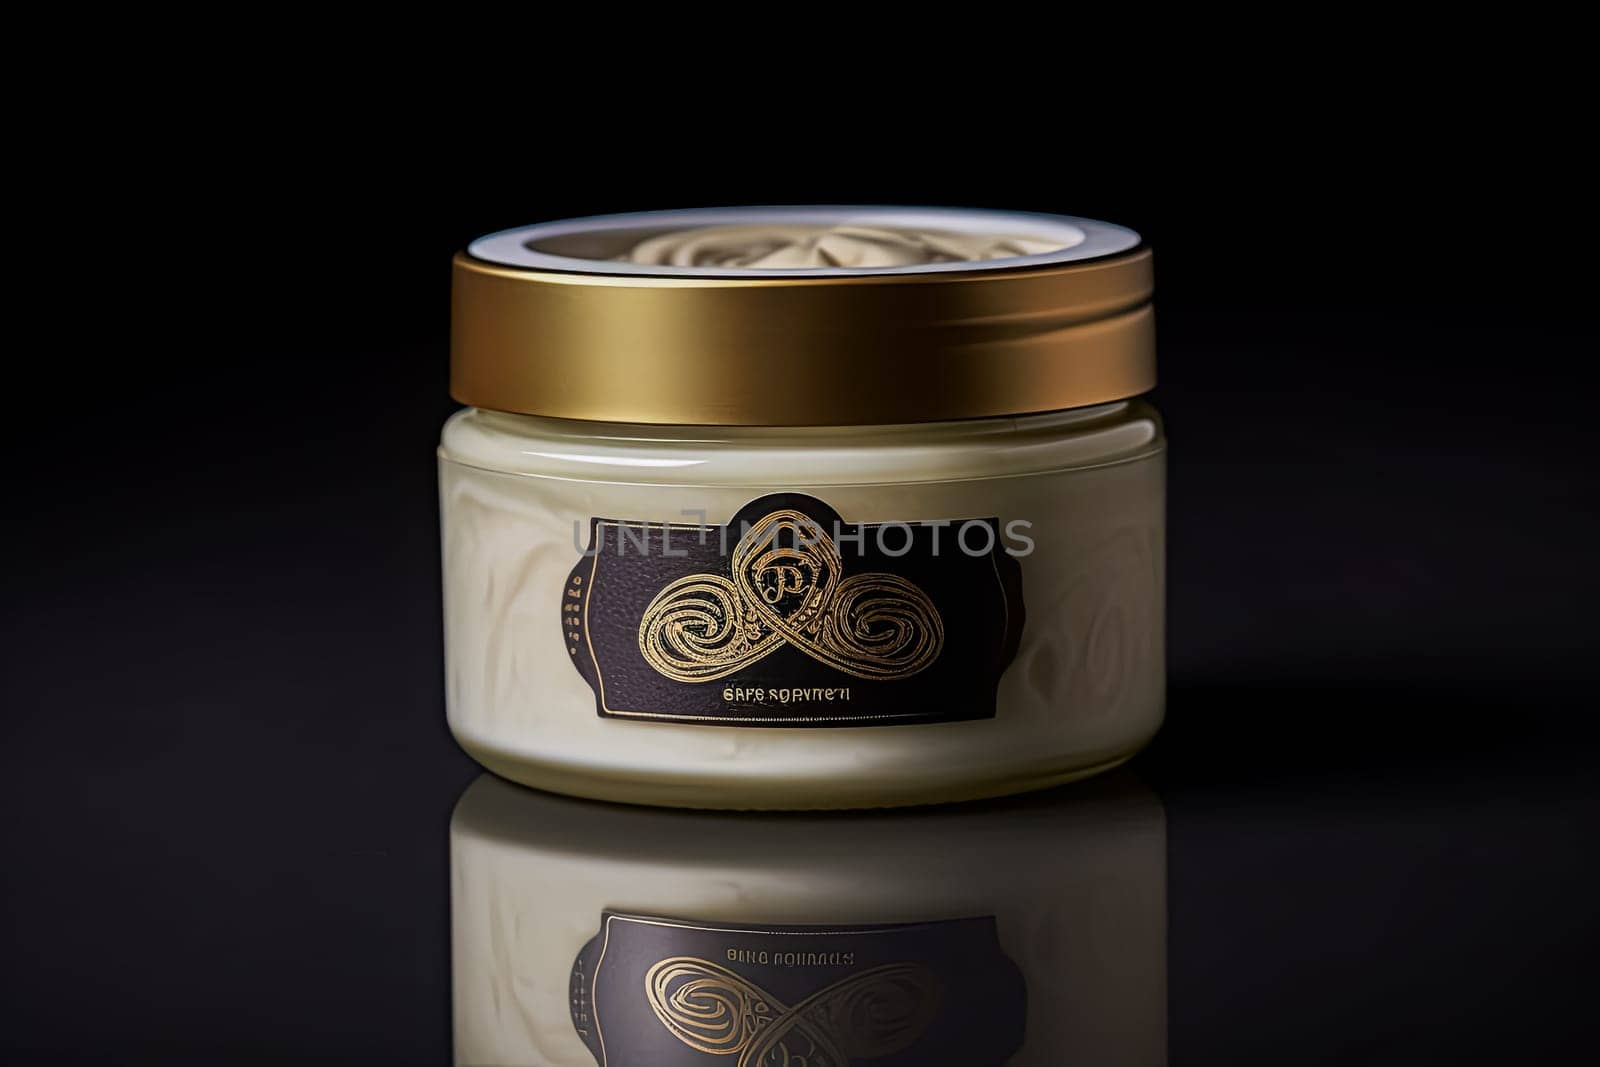 A jar of lotion sits on a wooden surface. The lotion is creamy and has a light color. Concept of relaxation and self-care